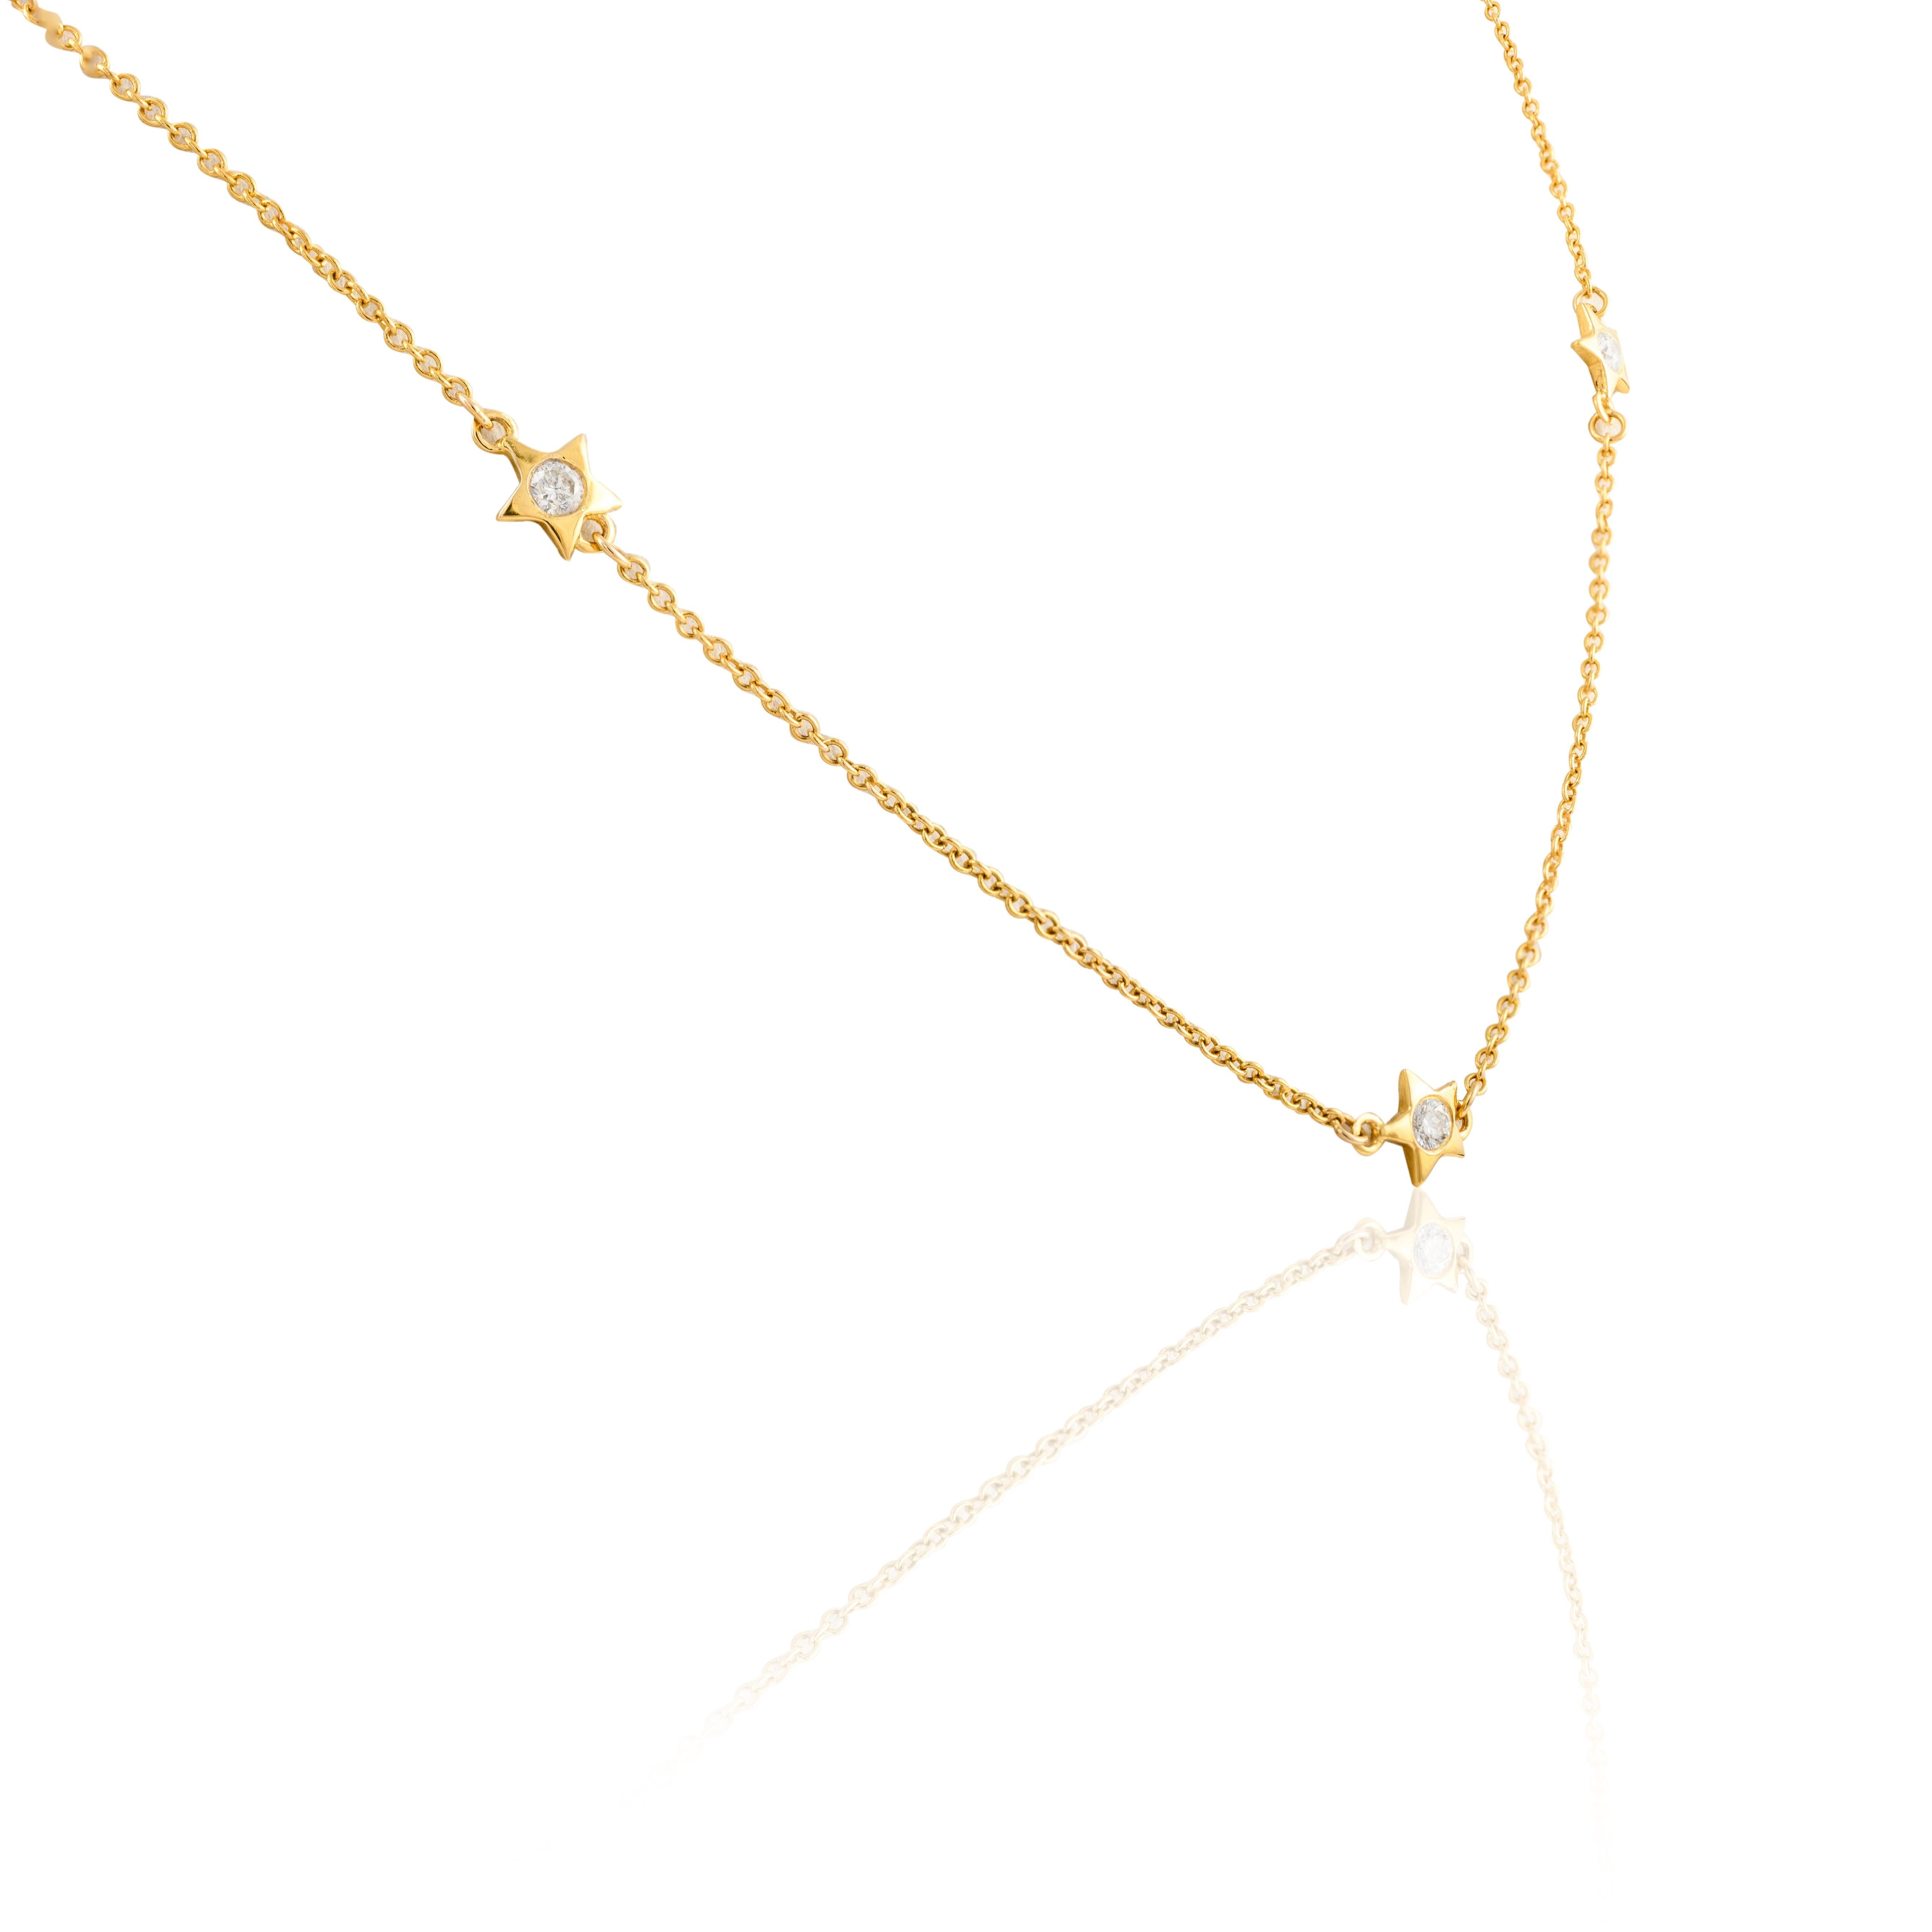 Women's Dainty Diamond Star Chain Necklace 14k Solid Yellow Gold, Daughter Gift For Sale